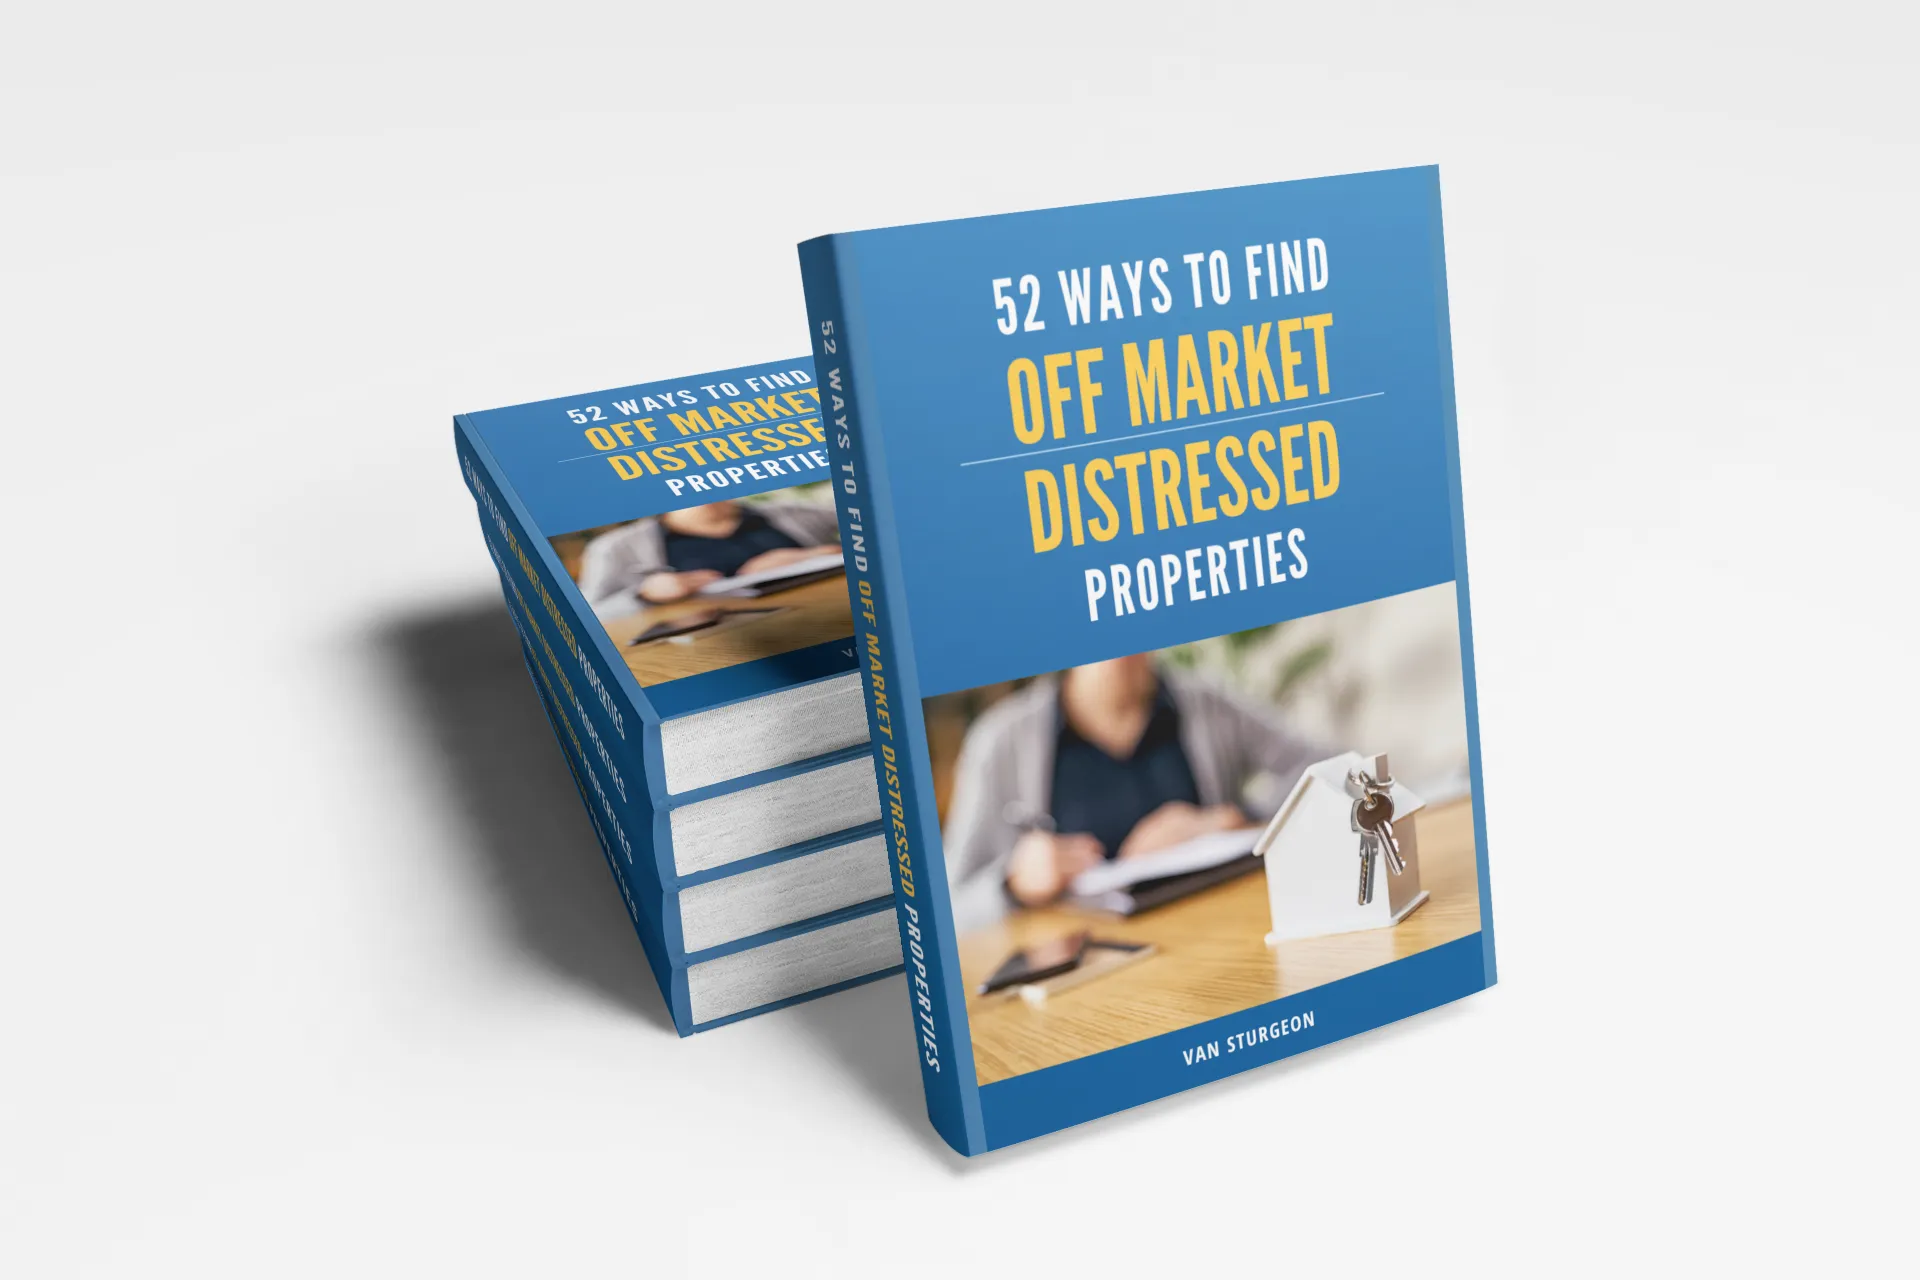 52 Ways To Find Off Market Distressed Properties